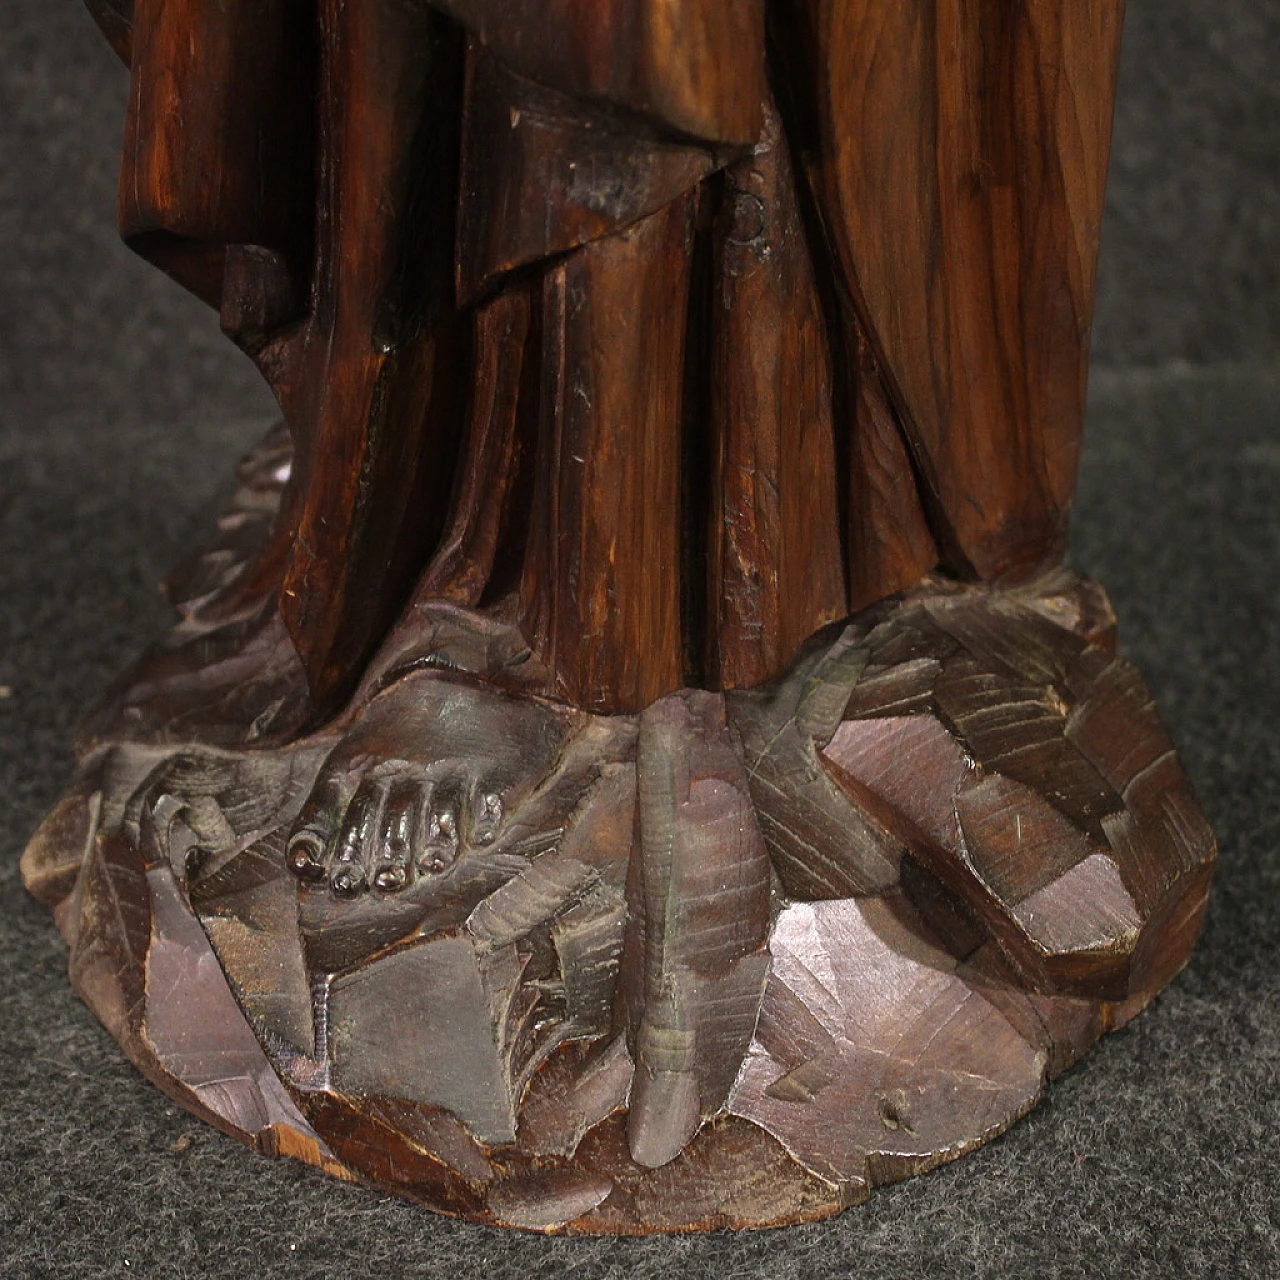 Madonna, mahogany-stained pear wood sculpture, mid-19th century 11